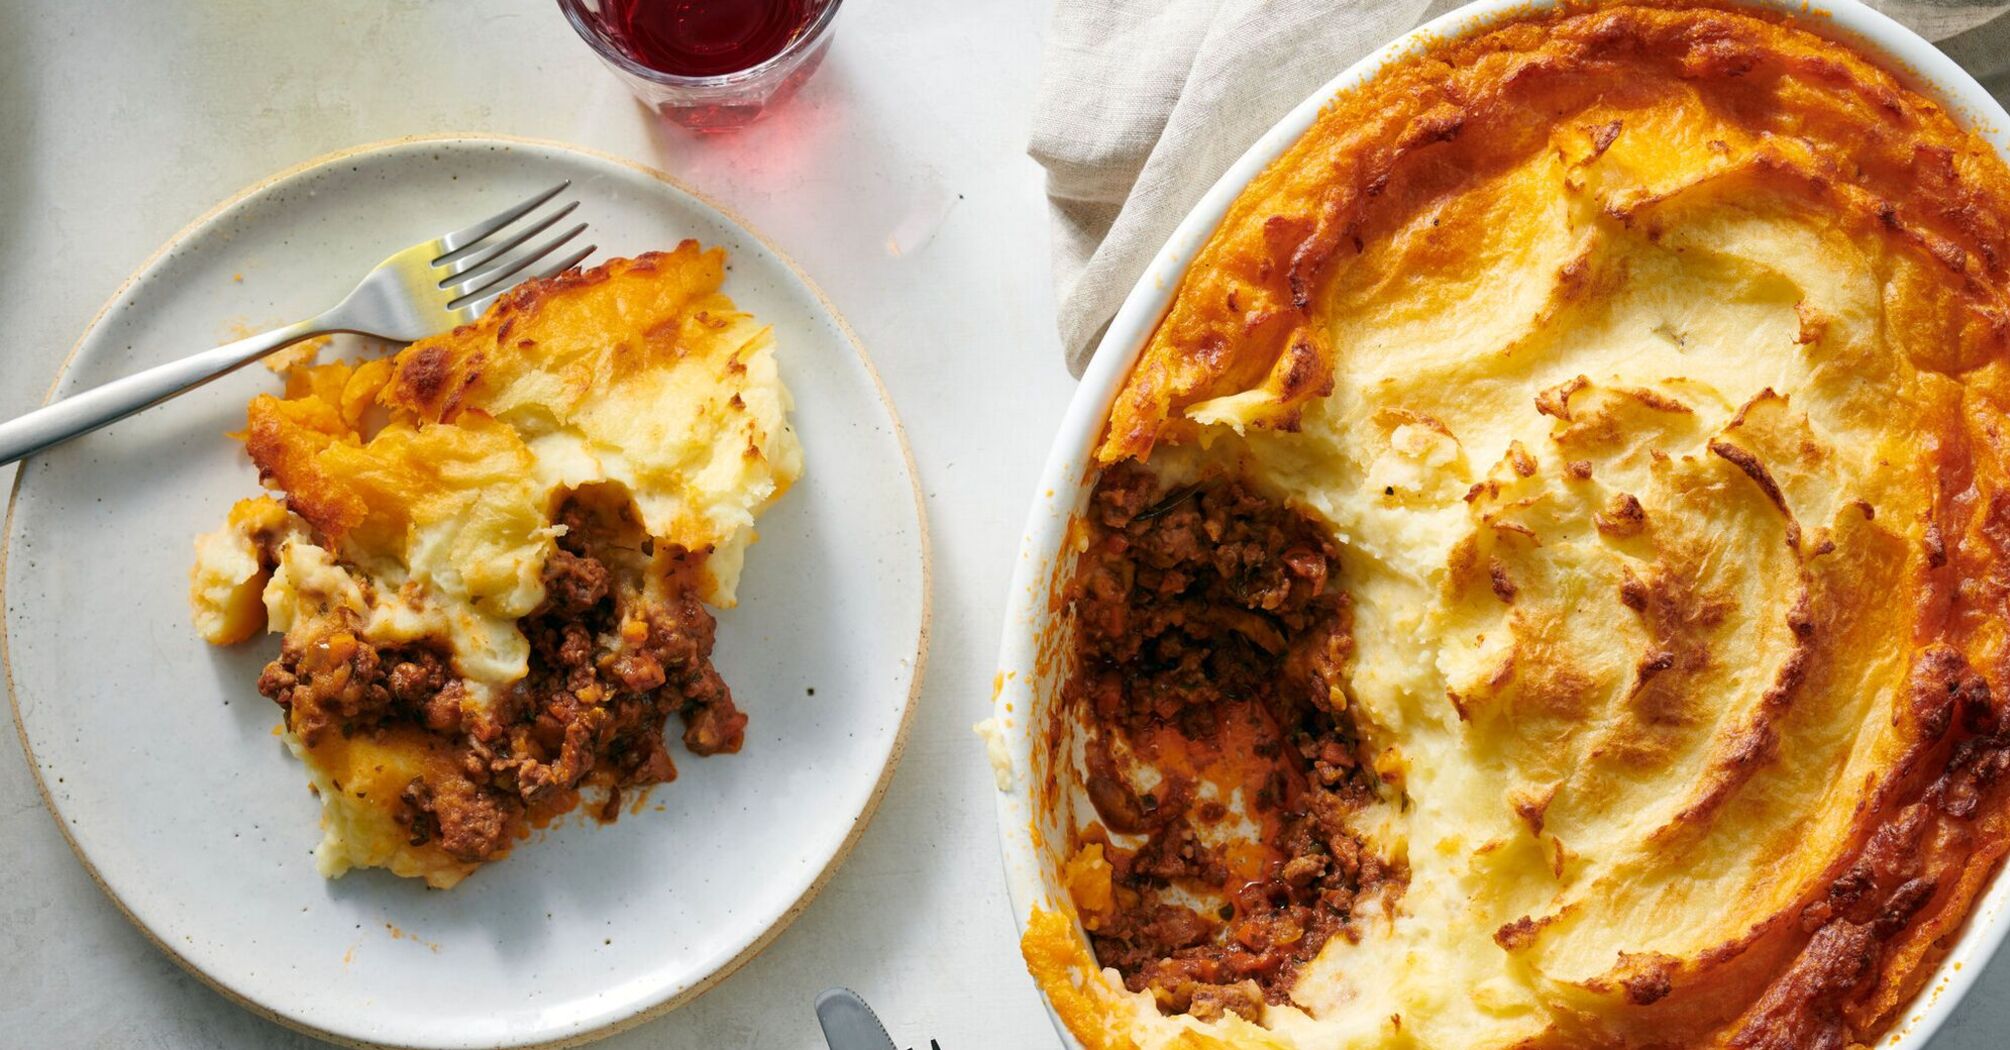 Shepherd's pie: how to turn leftover mashed potatoes into a delicious dish